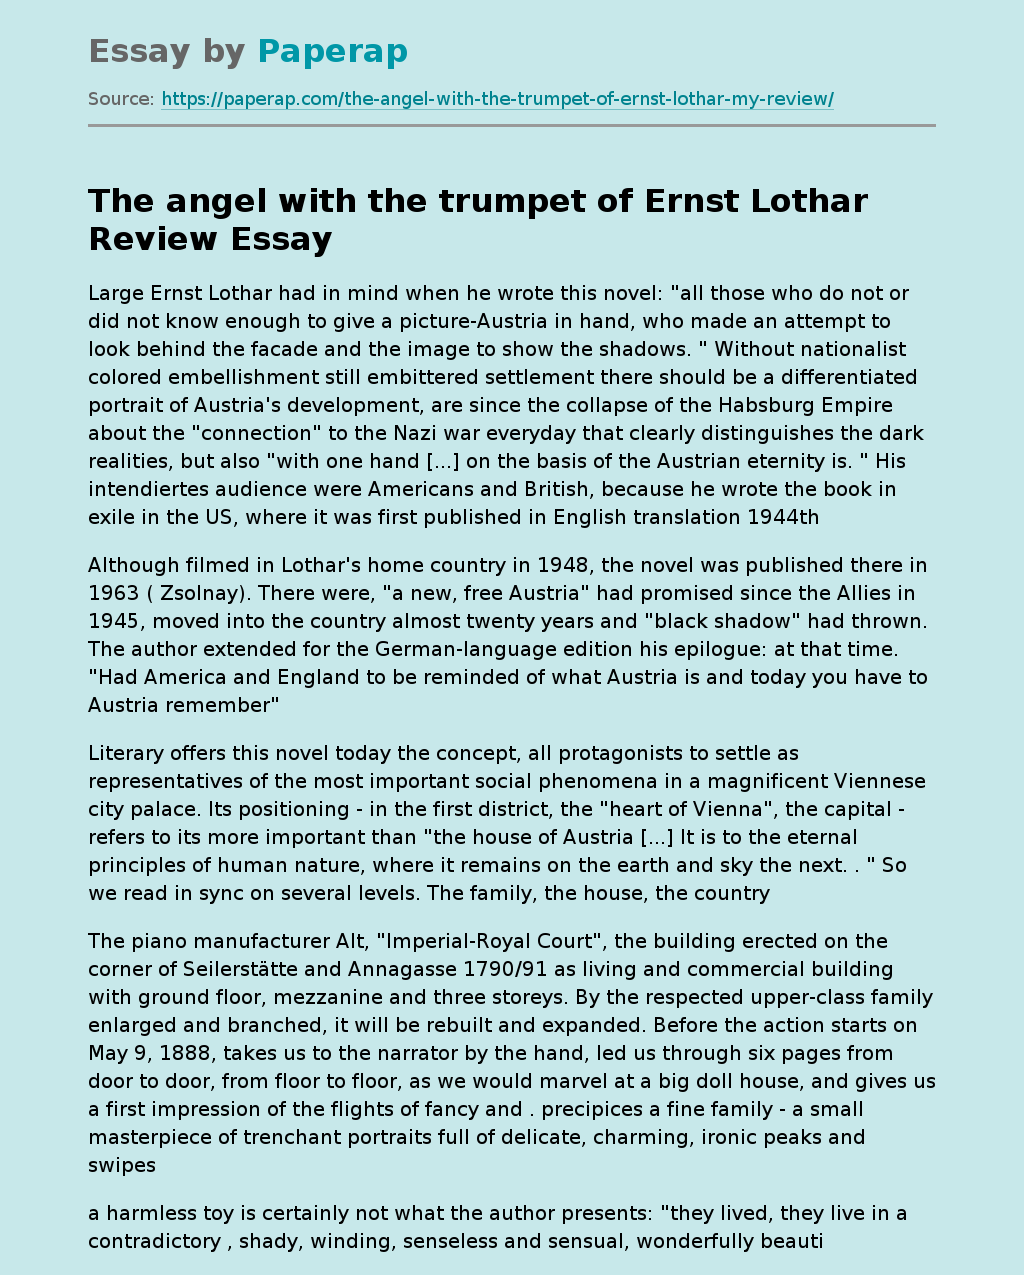 The Angel With The Trumpet Of Ernst Lothar Review